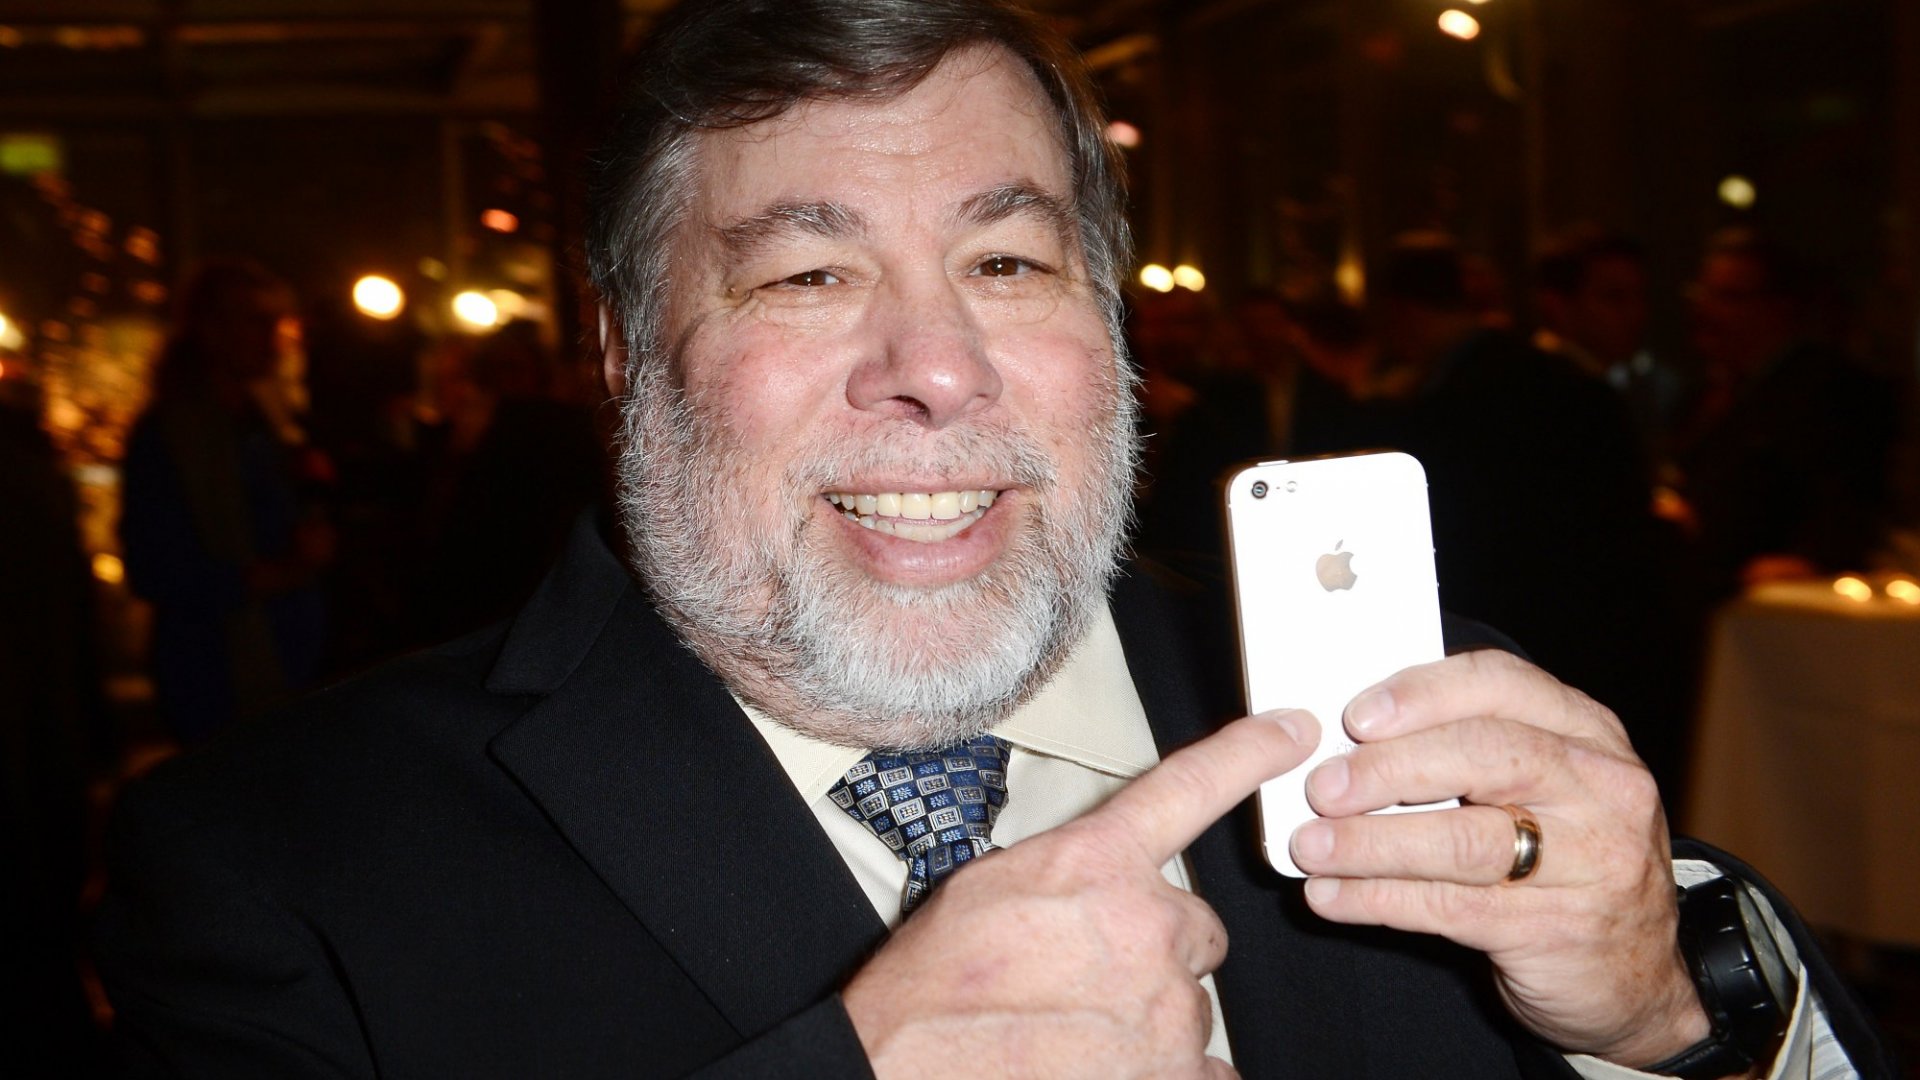 Apple's Steve Wozniak Dumped Facebook and Promoted His Own Company at the Very Same Time